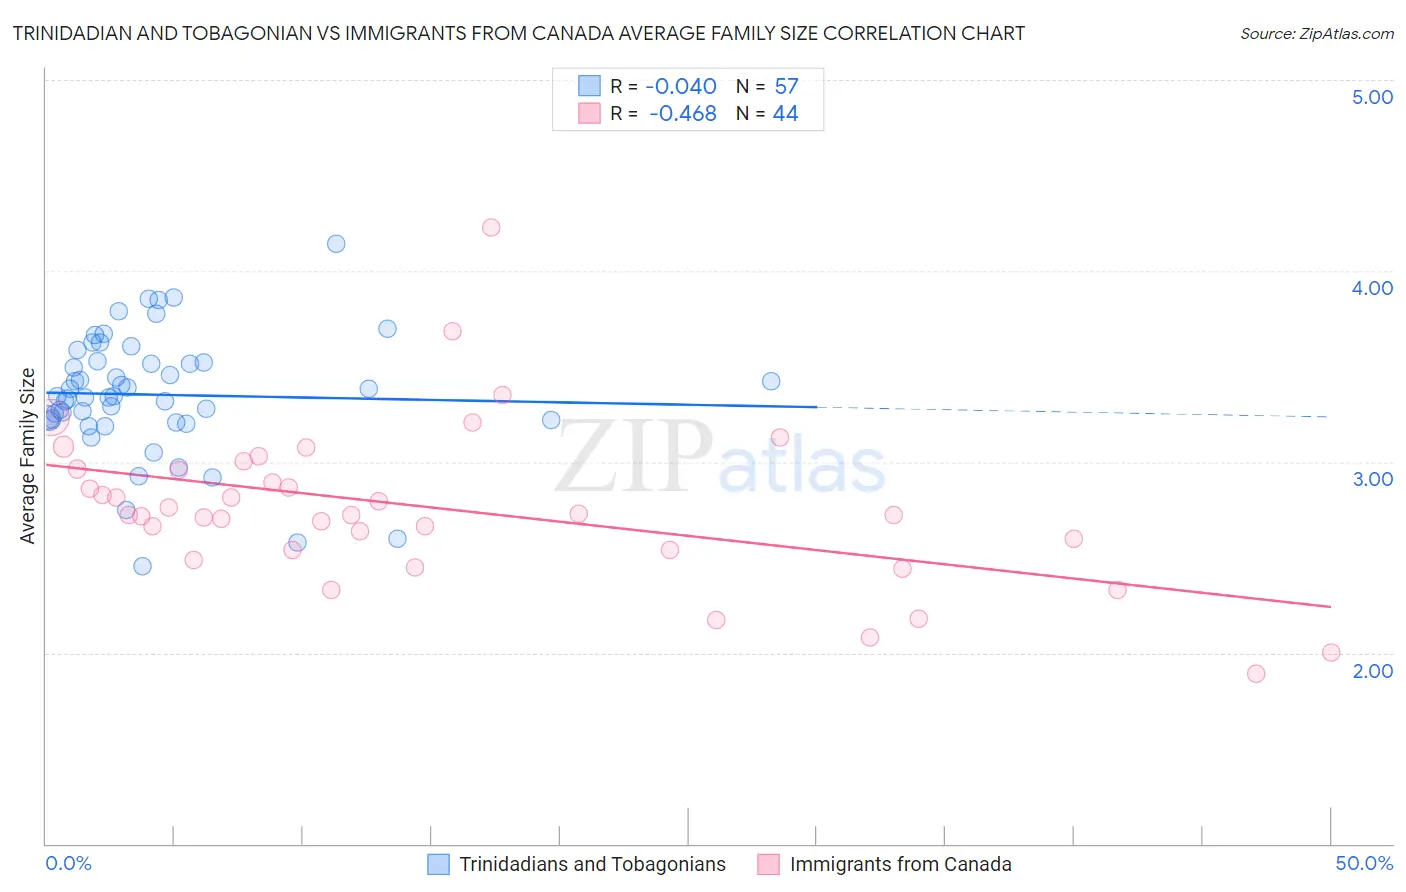 Trinidadian and Tobagonian vs Immigrants from Canada Average Family Size